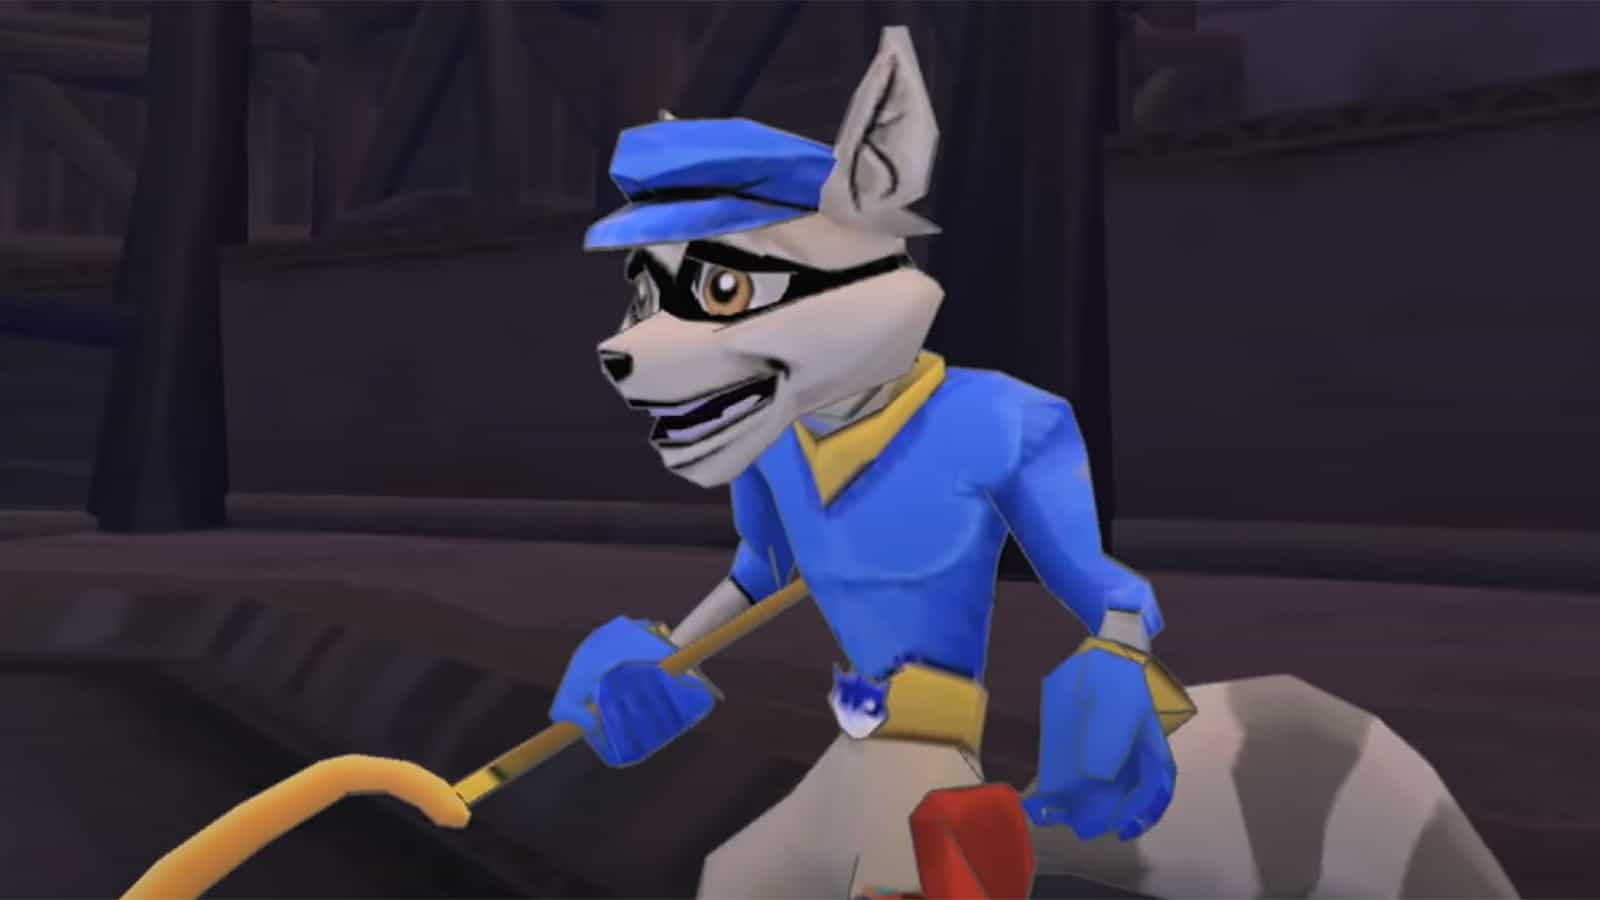 Sucker Punch Productions on X: Sly is coming to PlayStation Plus! Starting  September 20, The Sly Collection, Sly Cooper: Thieves in Time, and  Bentley's Hackpack will all be available for Premium members!